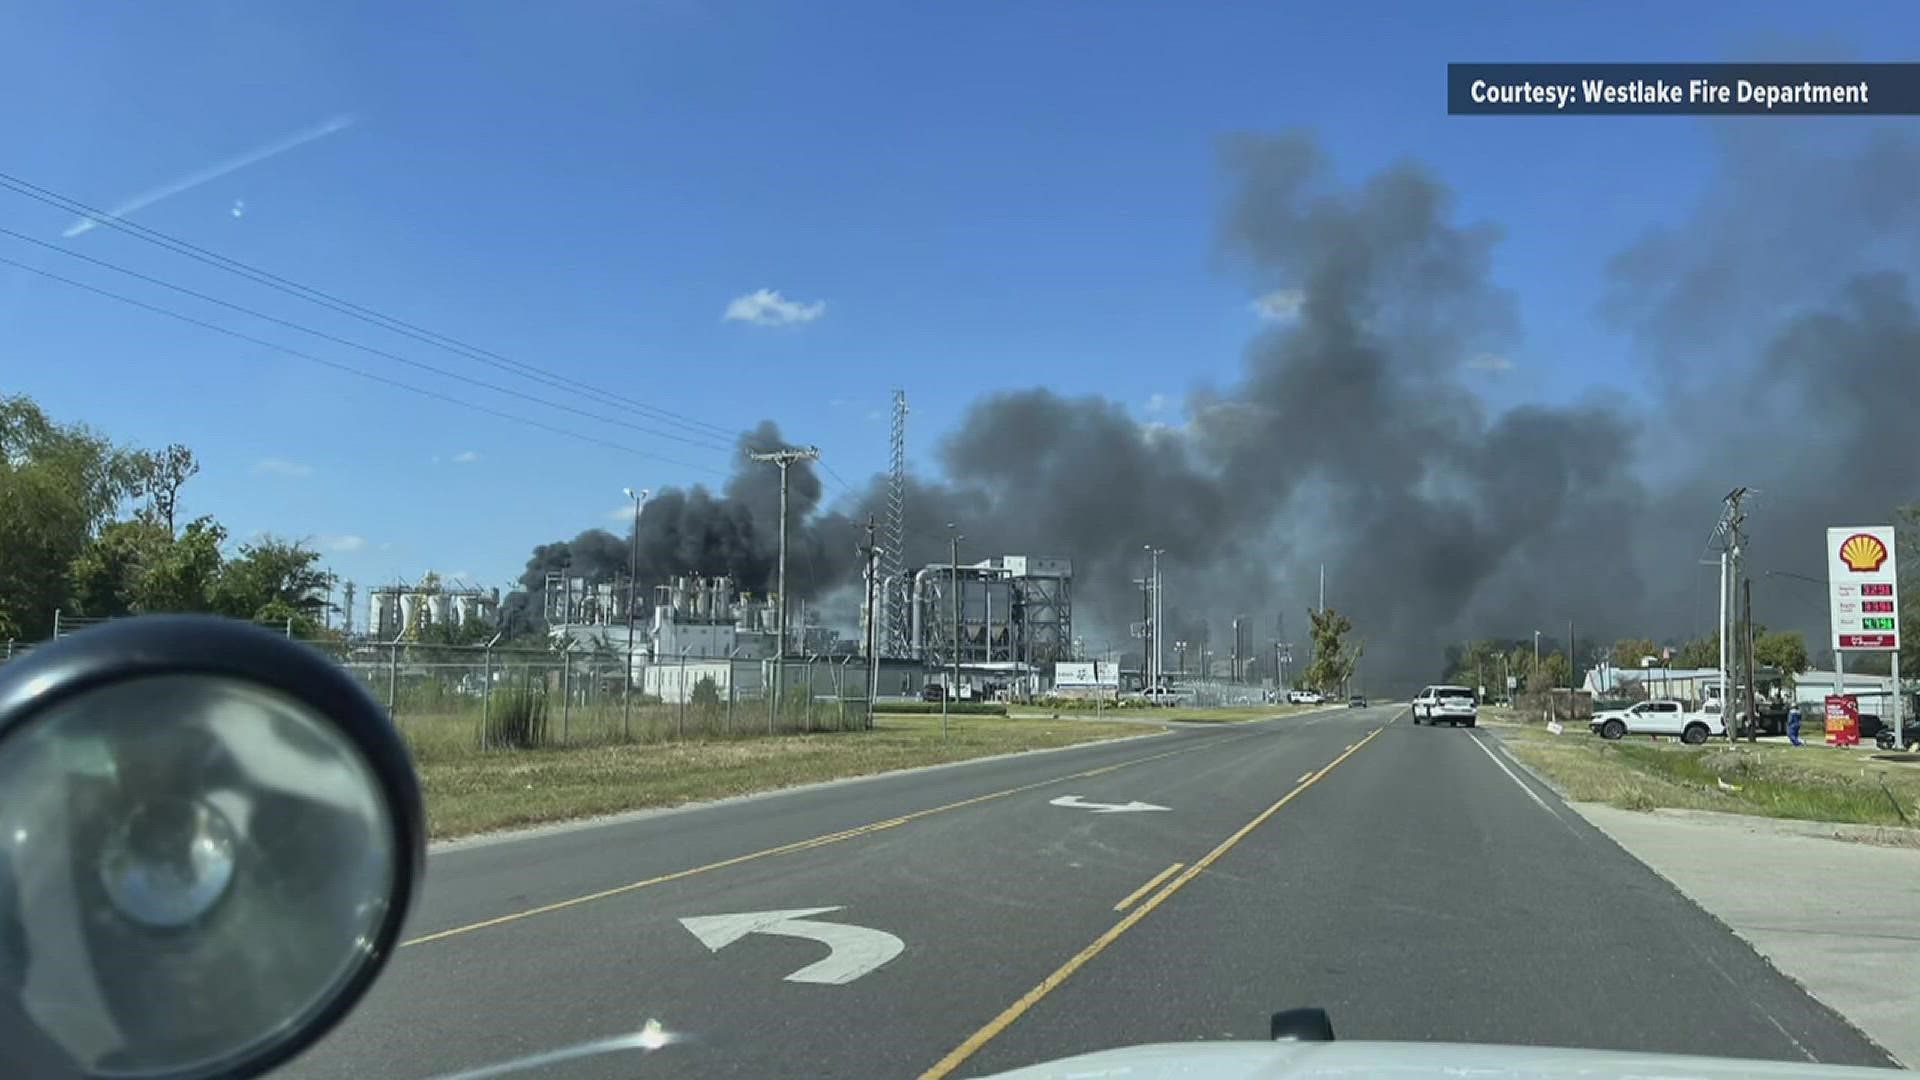 An investigation is underway after reports of an explosion and fire at a chemical plant in Louisiana.